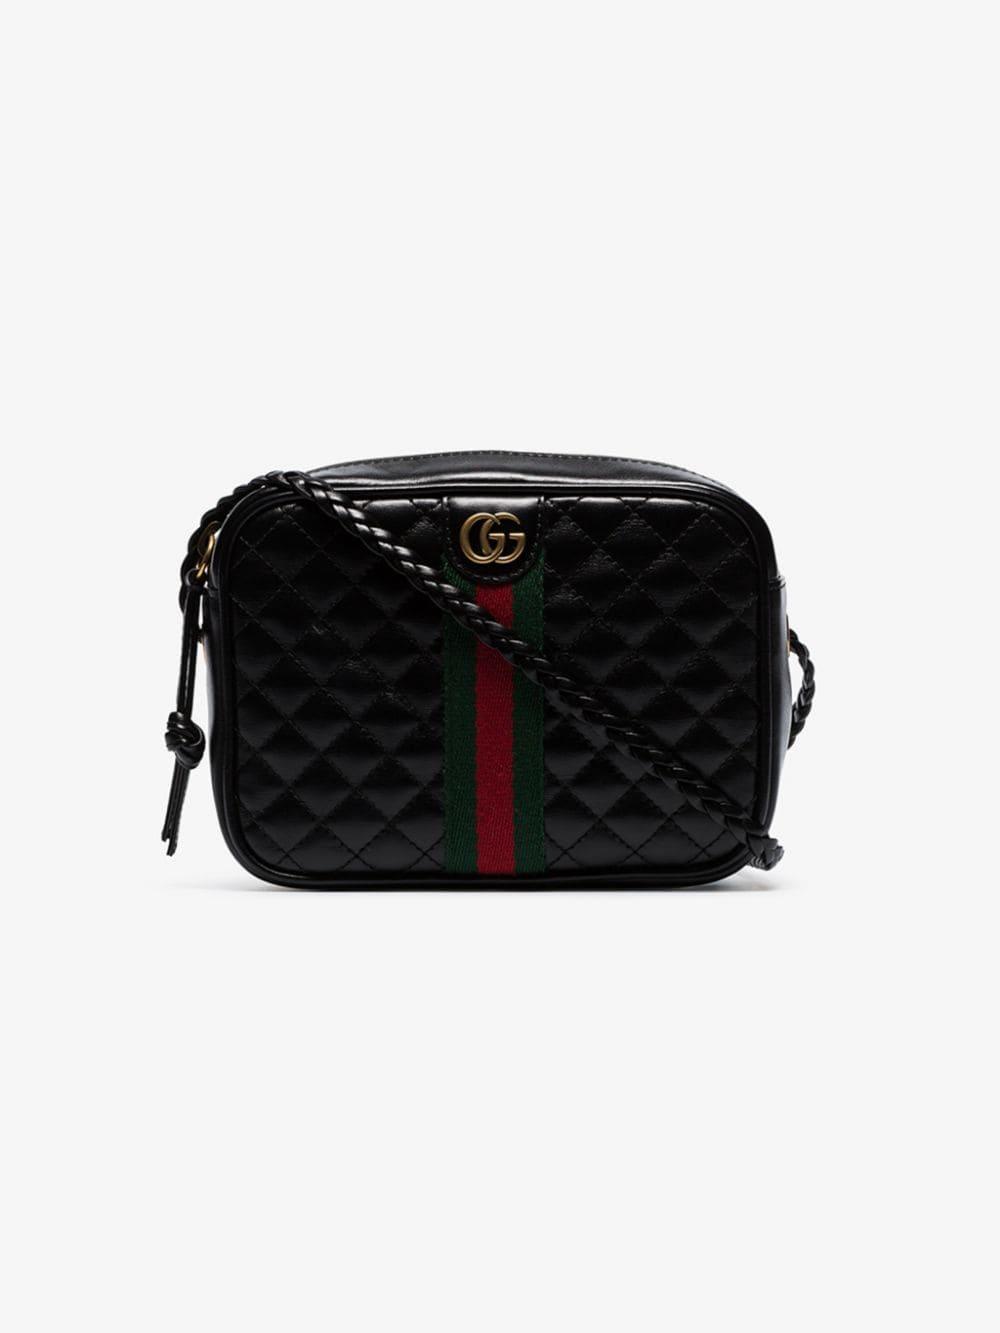 quilted gucci bag